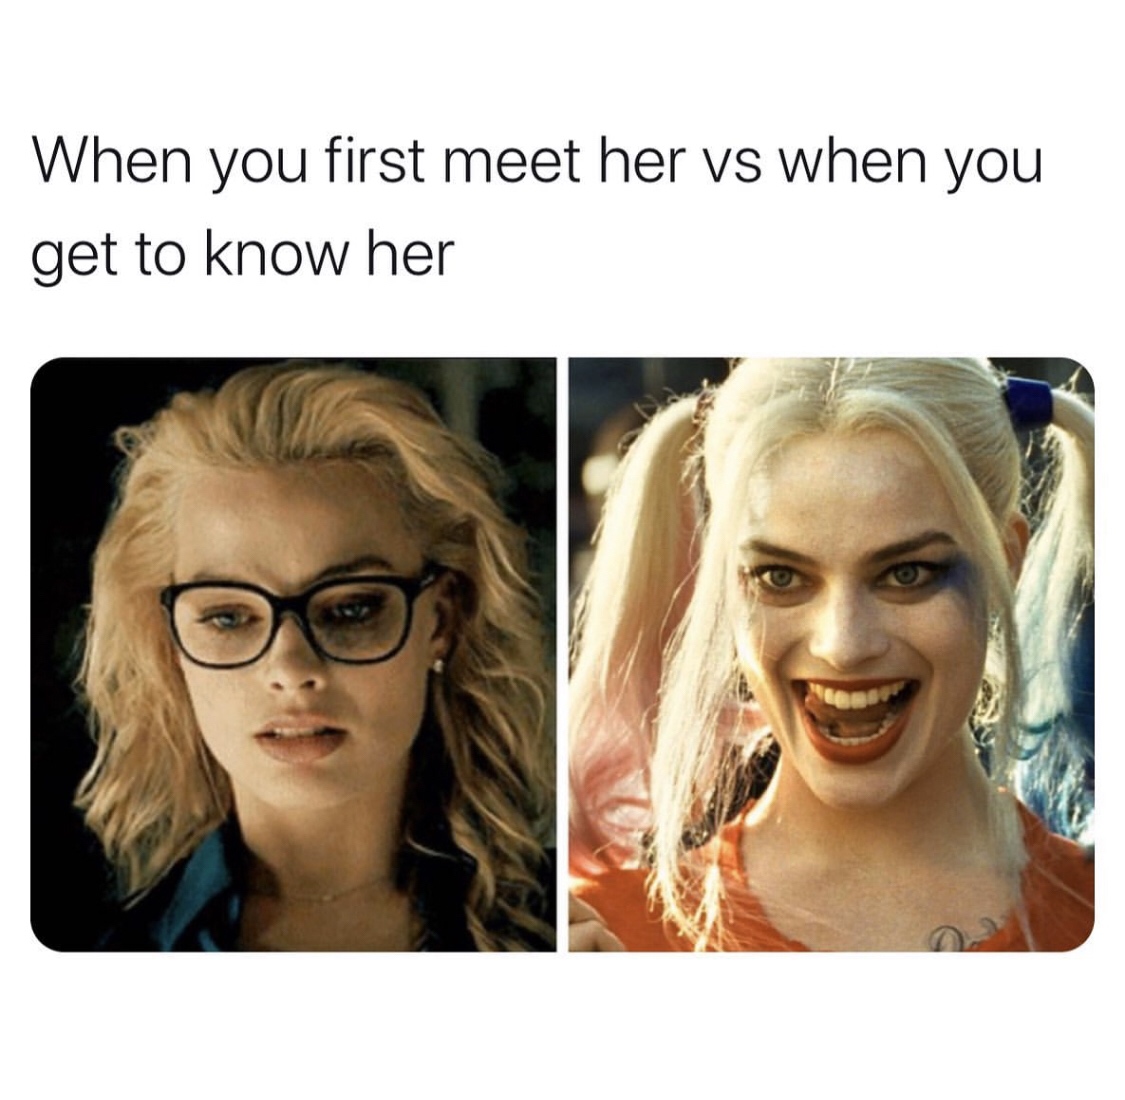 When you first meet her vs when you get to know her